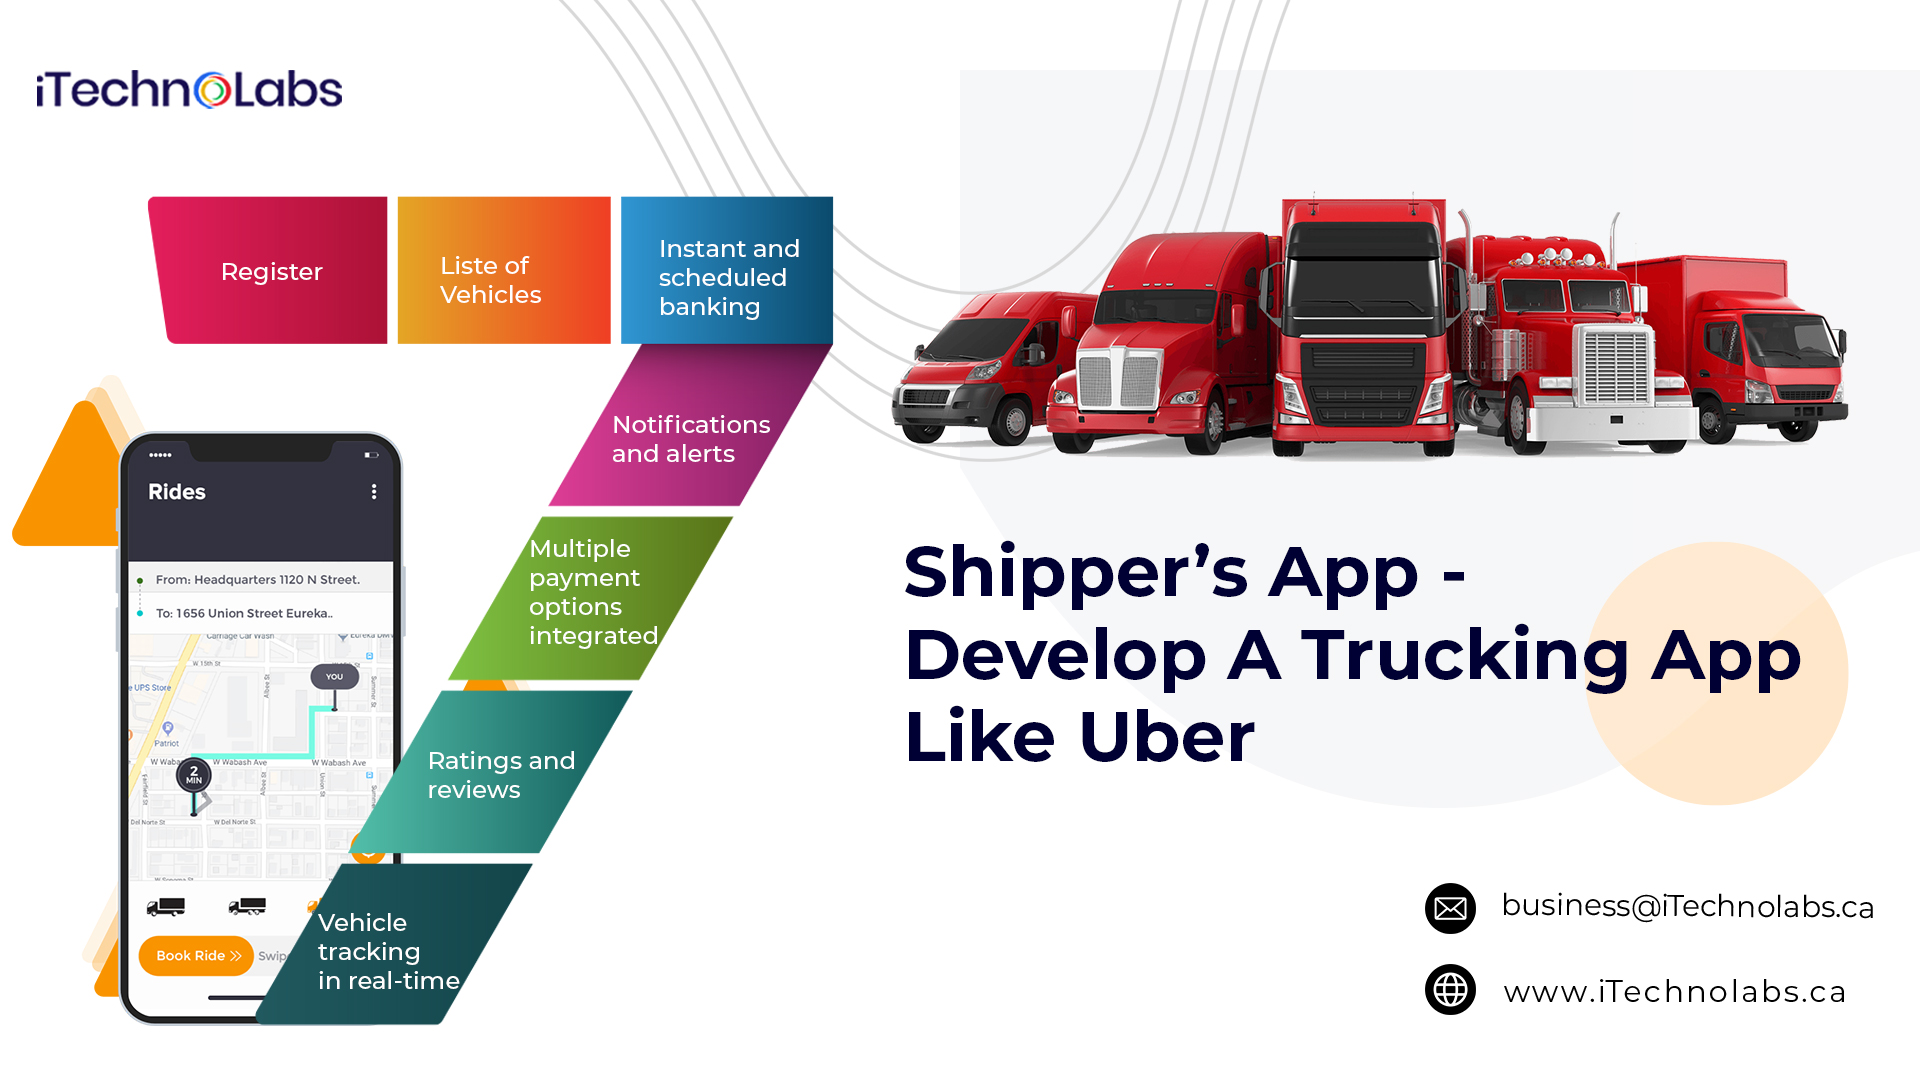 shippers app develop a trucking app like uber itechnolabs